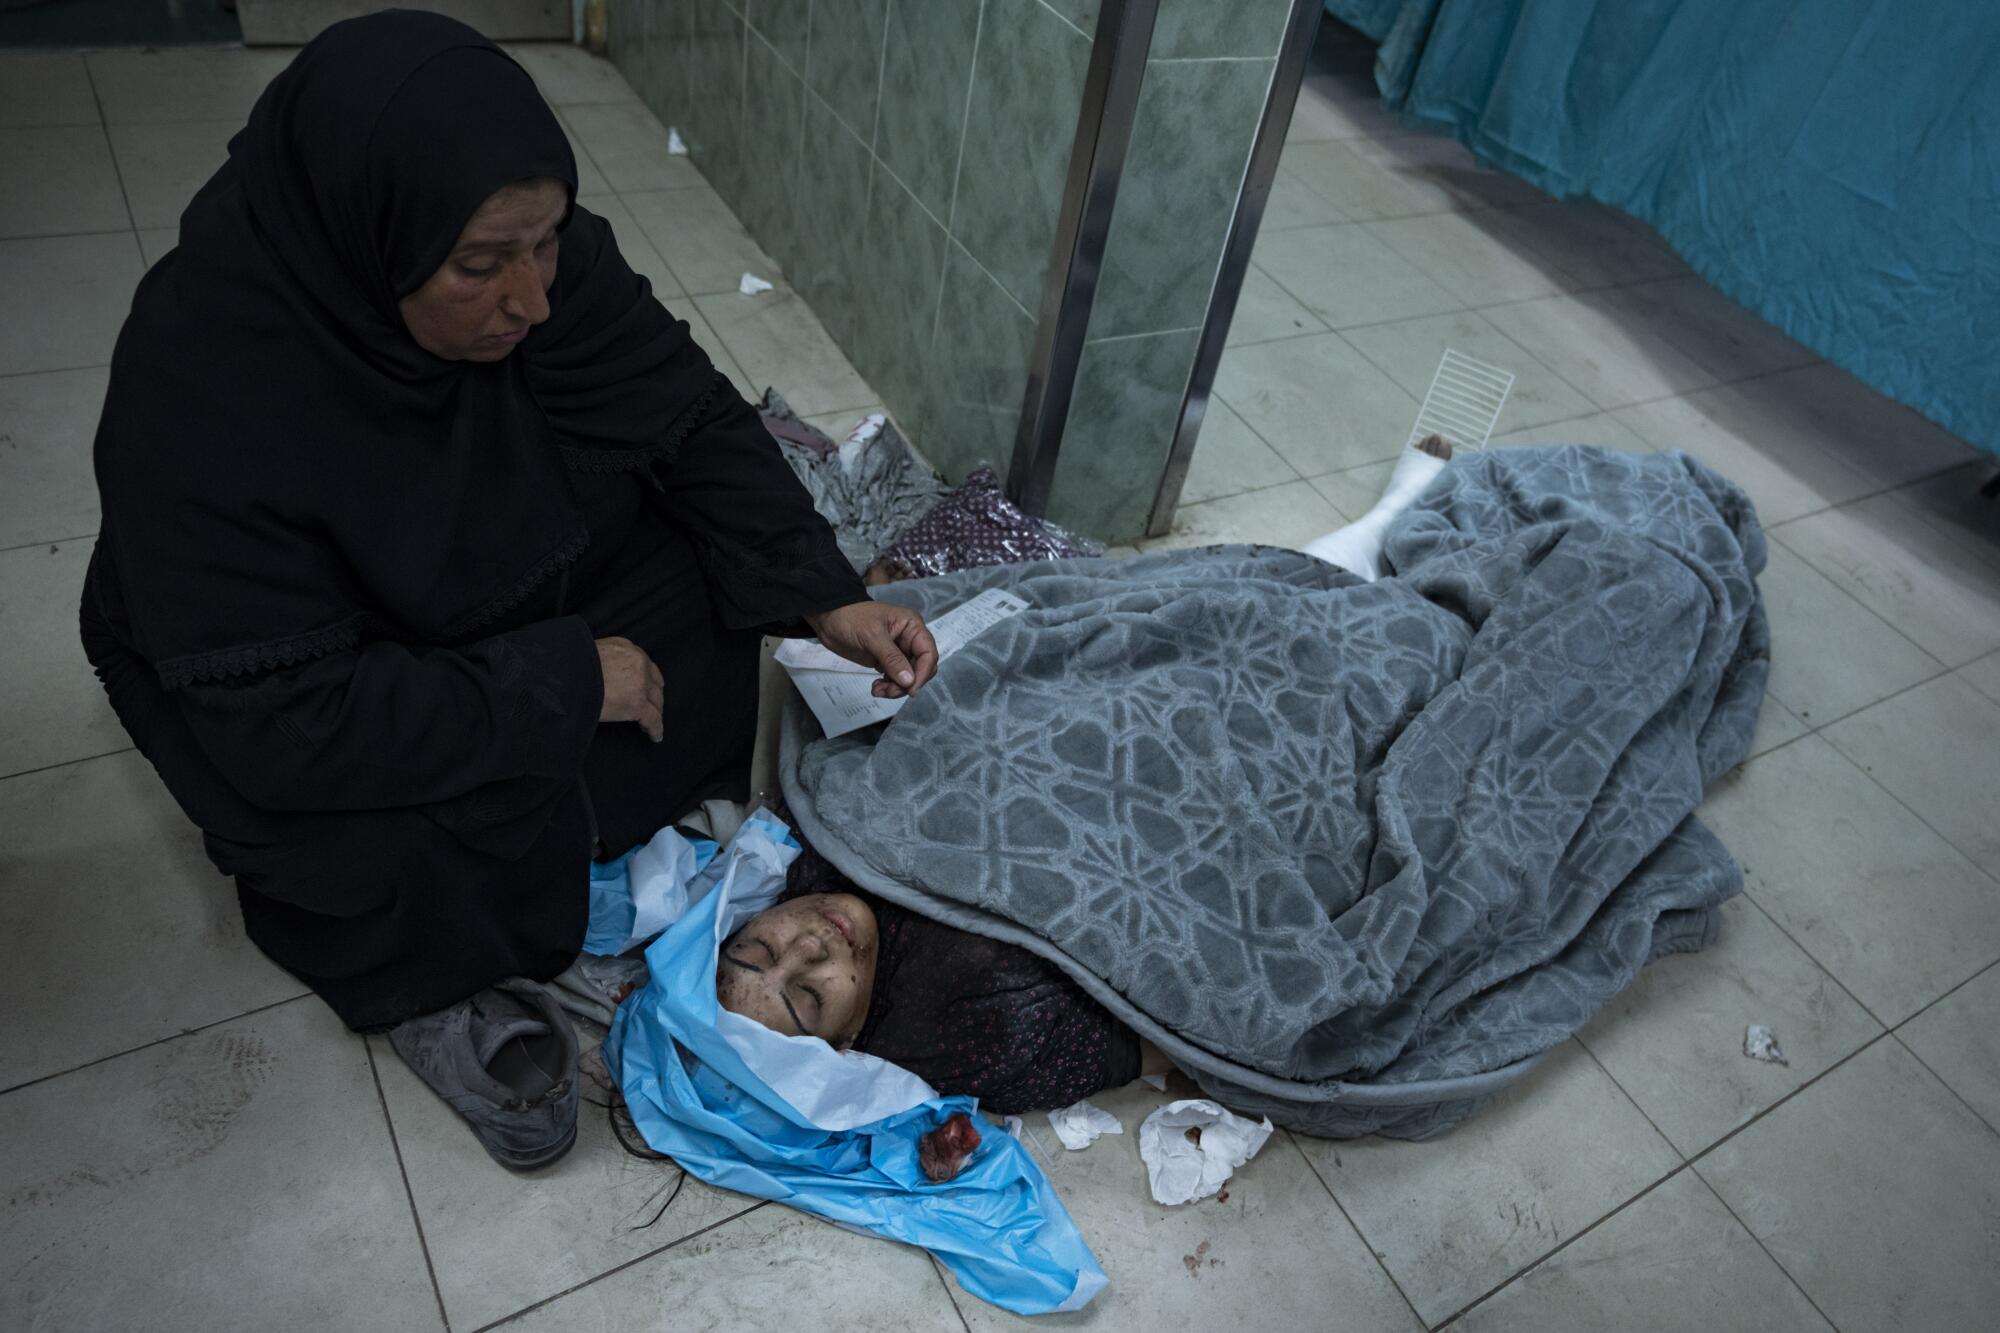 Wounded Palestinian awaiting treatment at a hospital in Rafah, Gaza